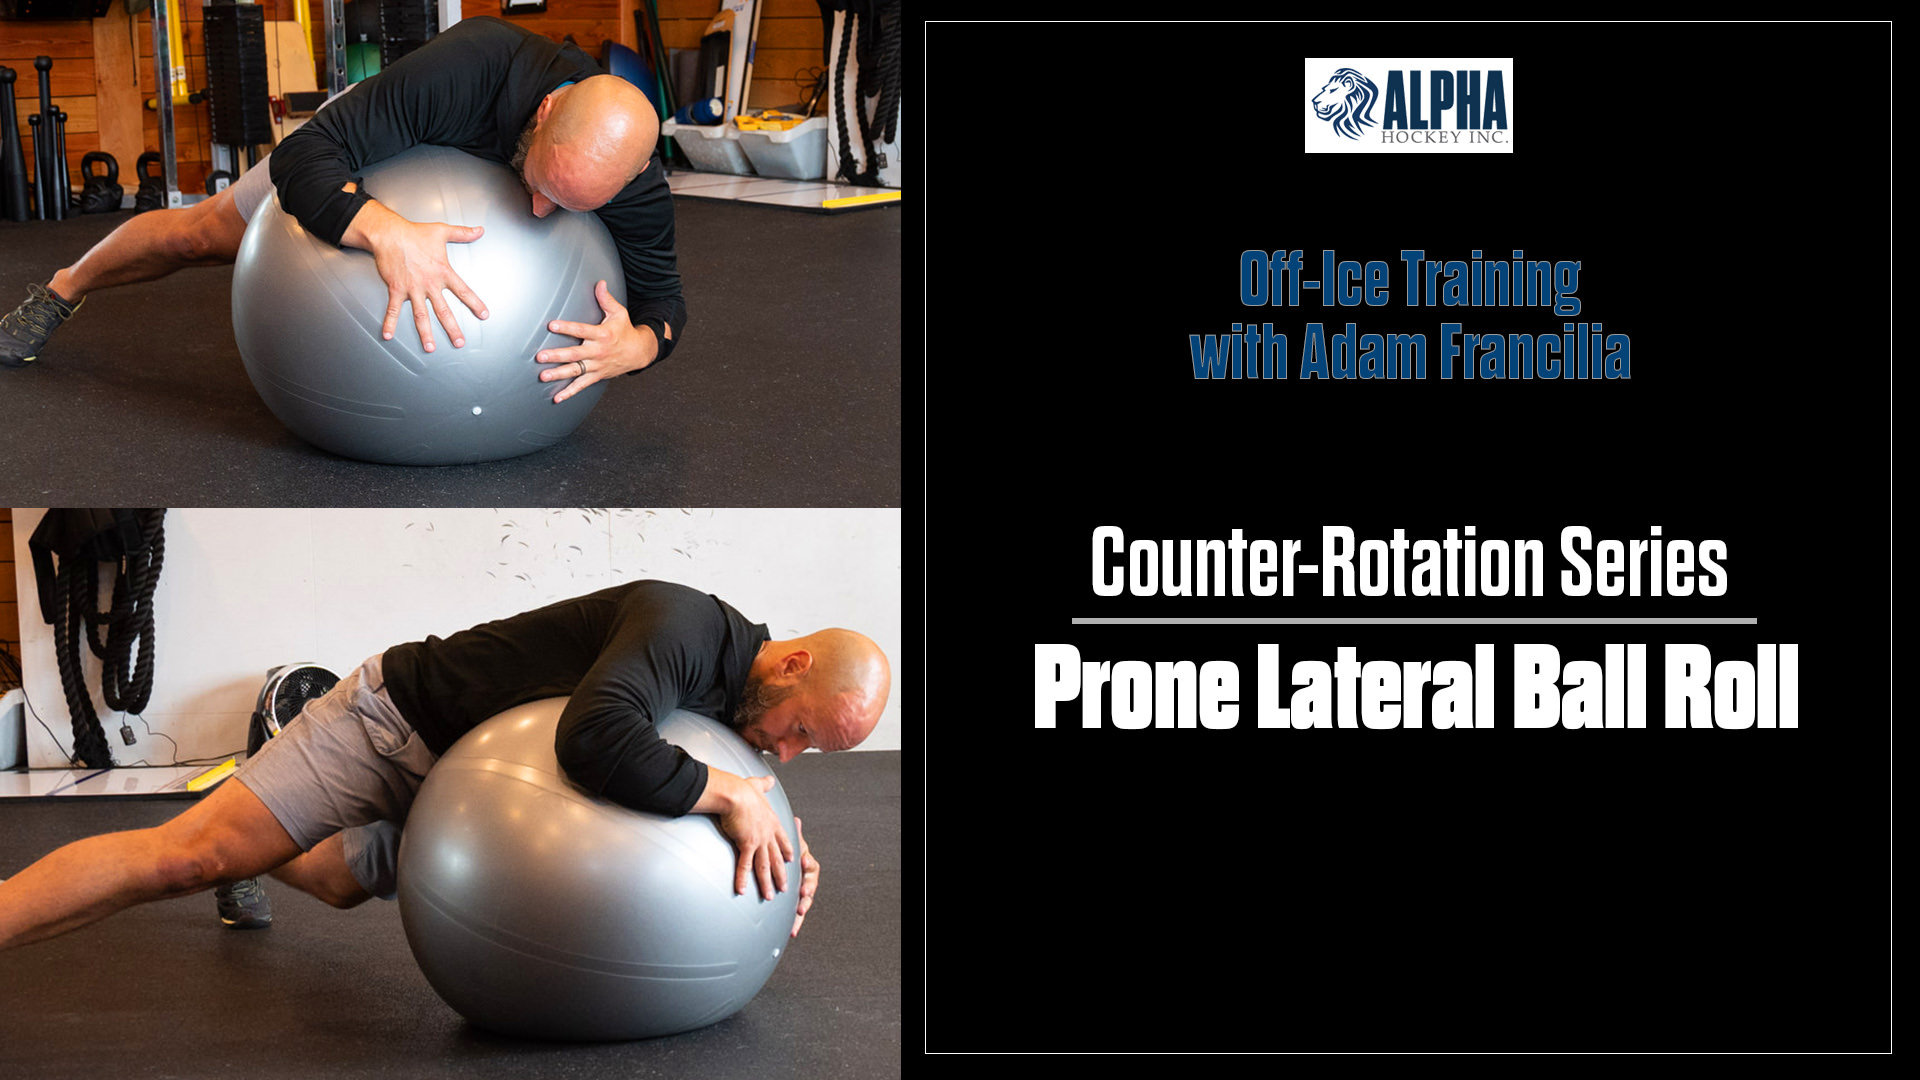 Off-Ice with Adam Francilia: Prone Lateral Ball Roll